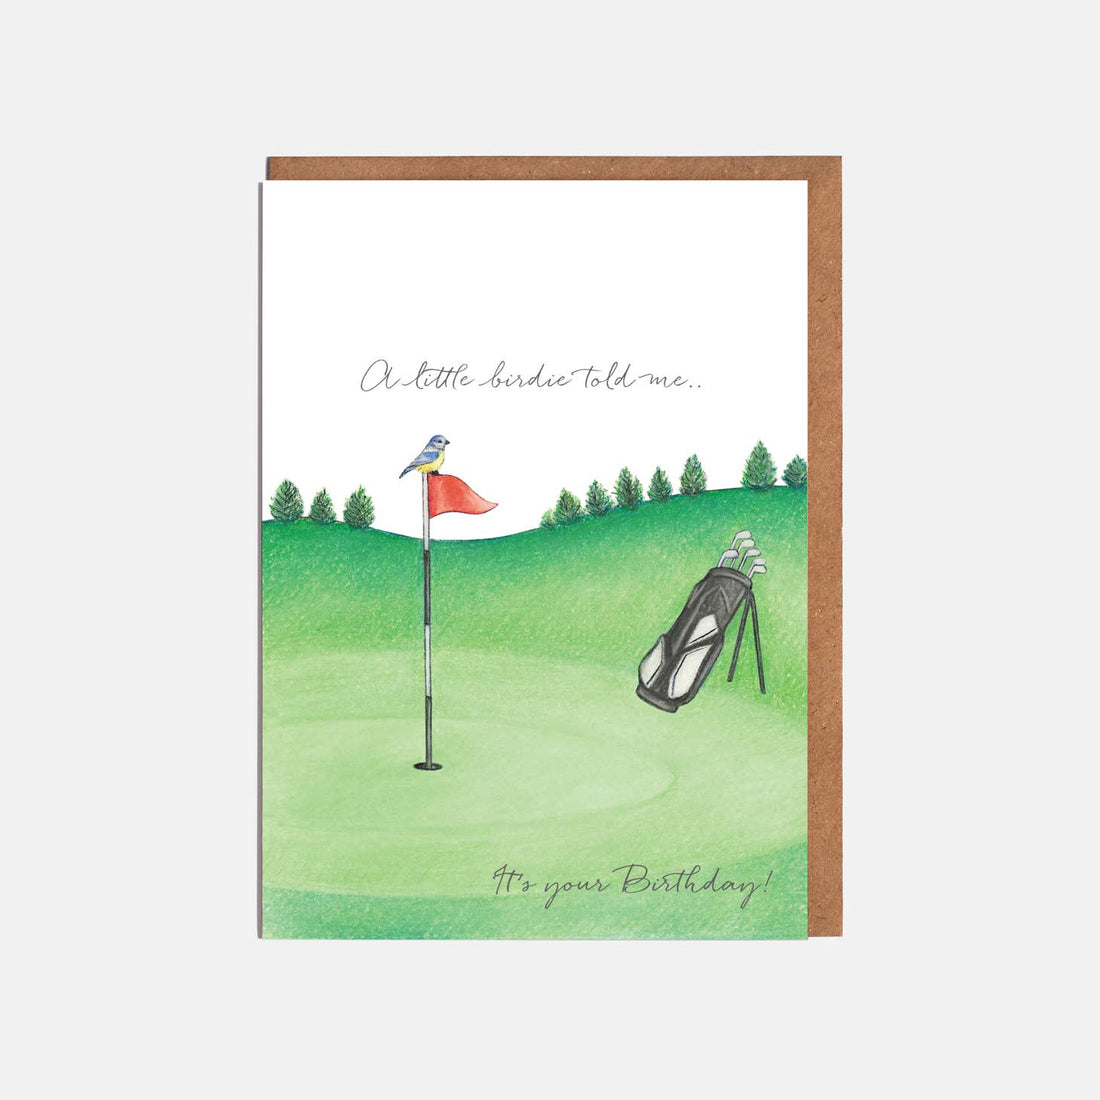 Greeting card featuring a hand-drawn golf theme with the phrase &quot;a little birdie told me... it&